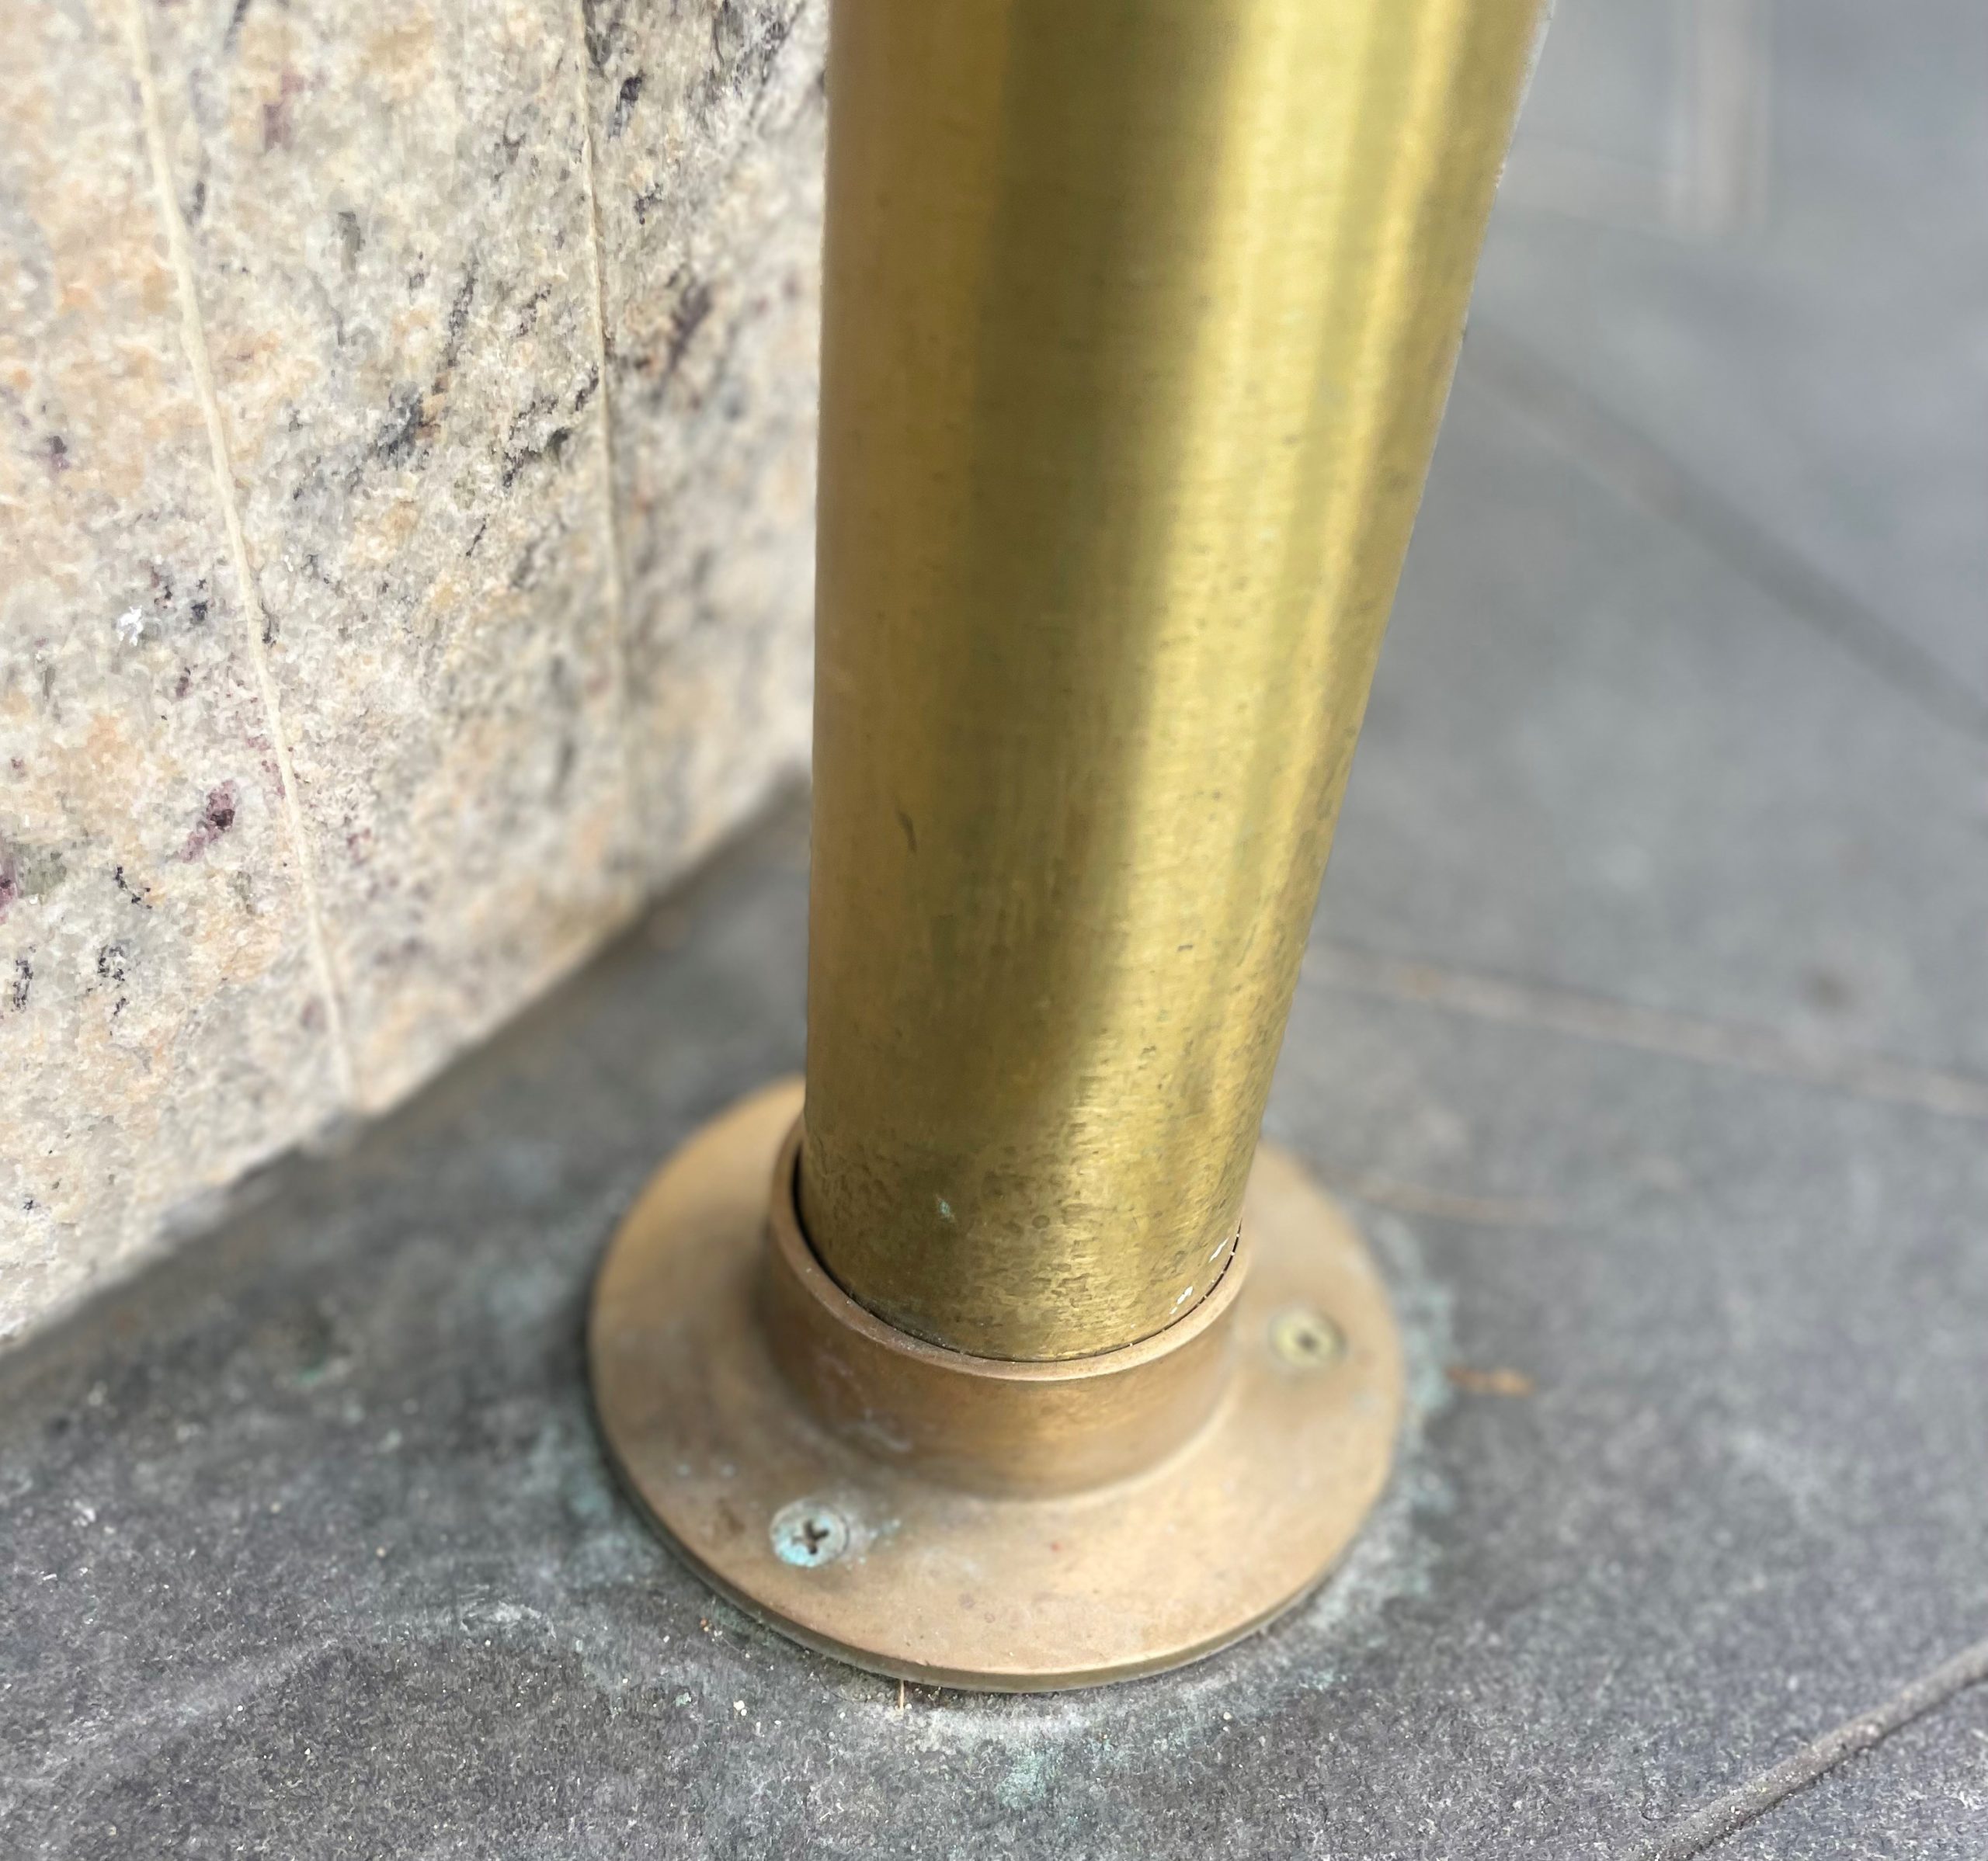 Plated Brass vs Stainless Steel - What's the Difference